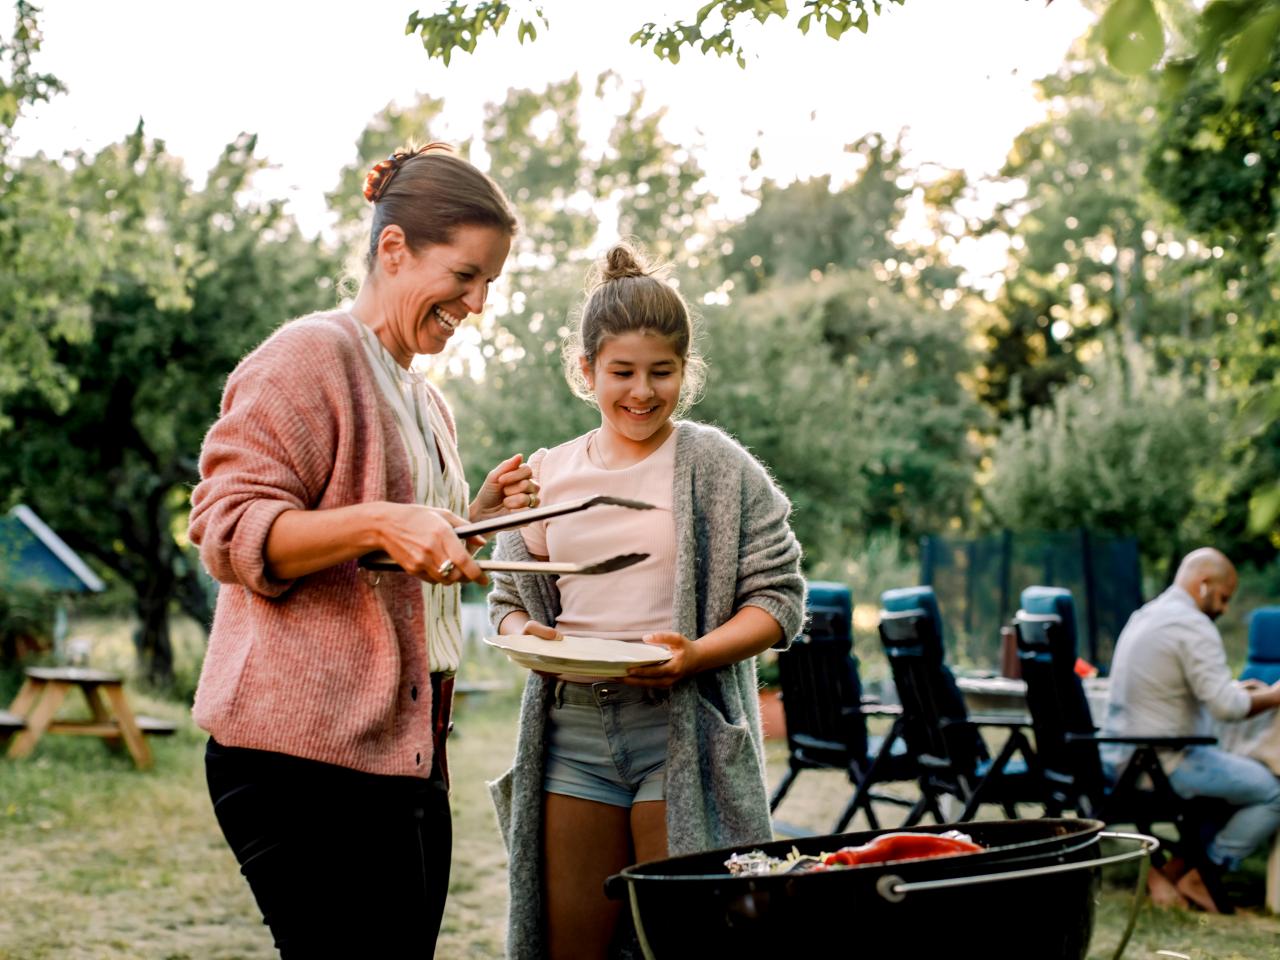 https://tlc.sndimg.com/content/dam/images/tlc/tlcme/fullset/2021/may/Lead-family-bbq-GettyImages-1289905424.jpg.rend.hgtvcom.1280.960.suffix/1620423832725.jpeg